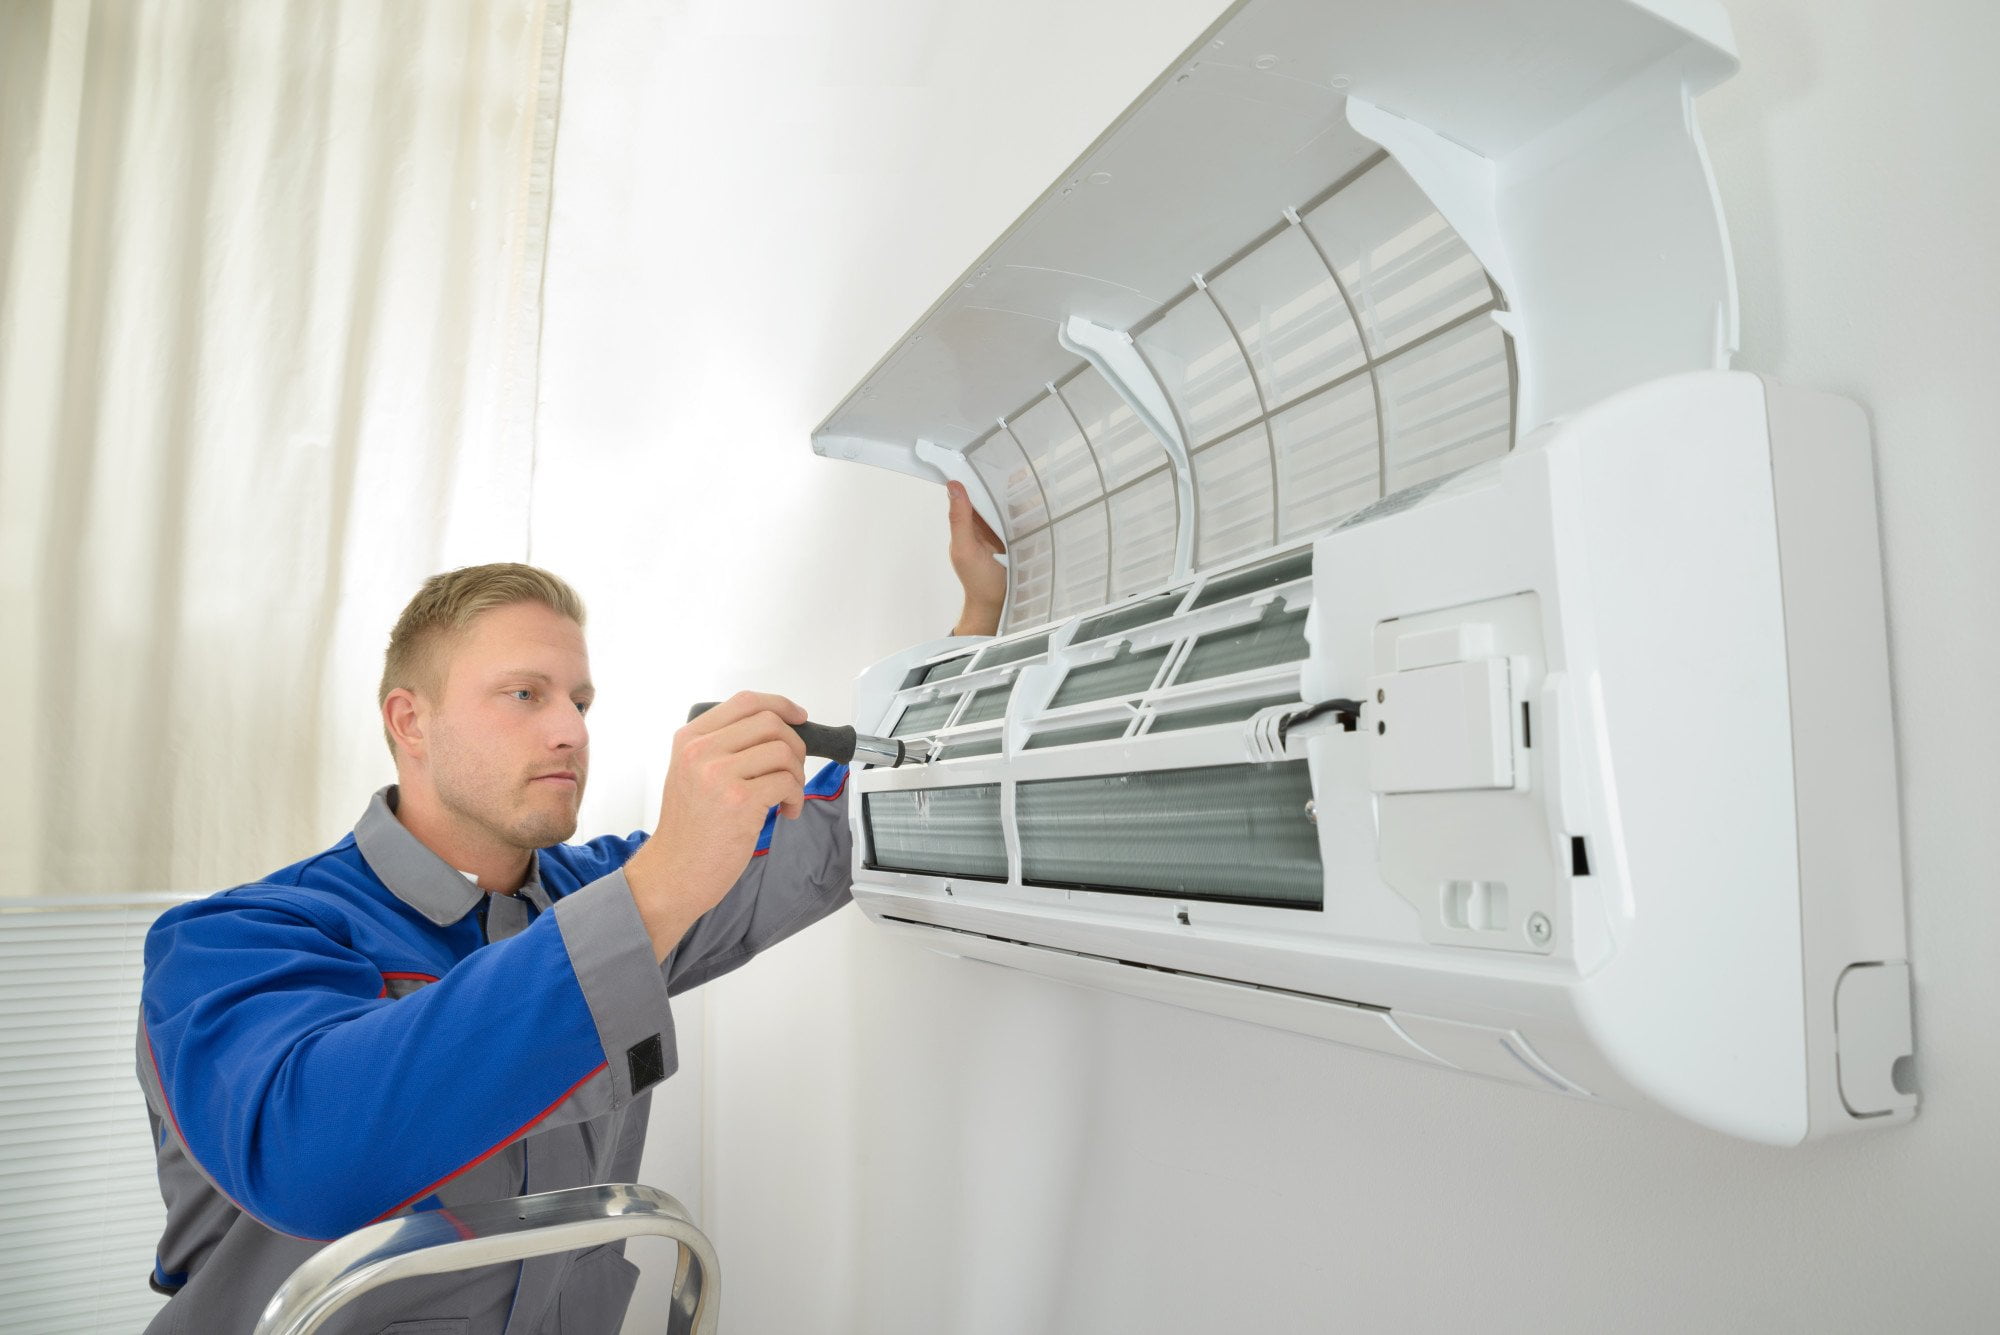 Is your HVAC system acting up? It might be time to call a professional. Keep reading to learn the signs you need an emergency AC repair service.